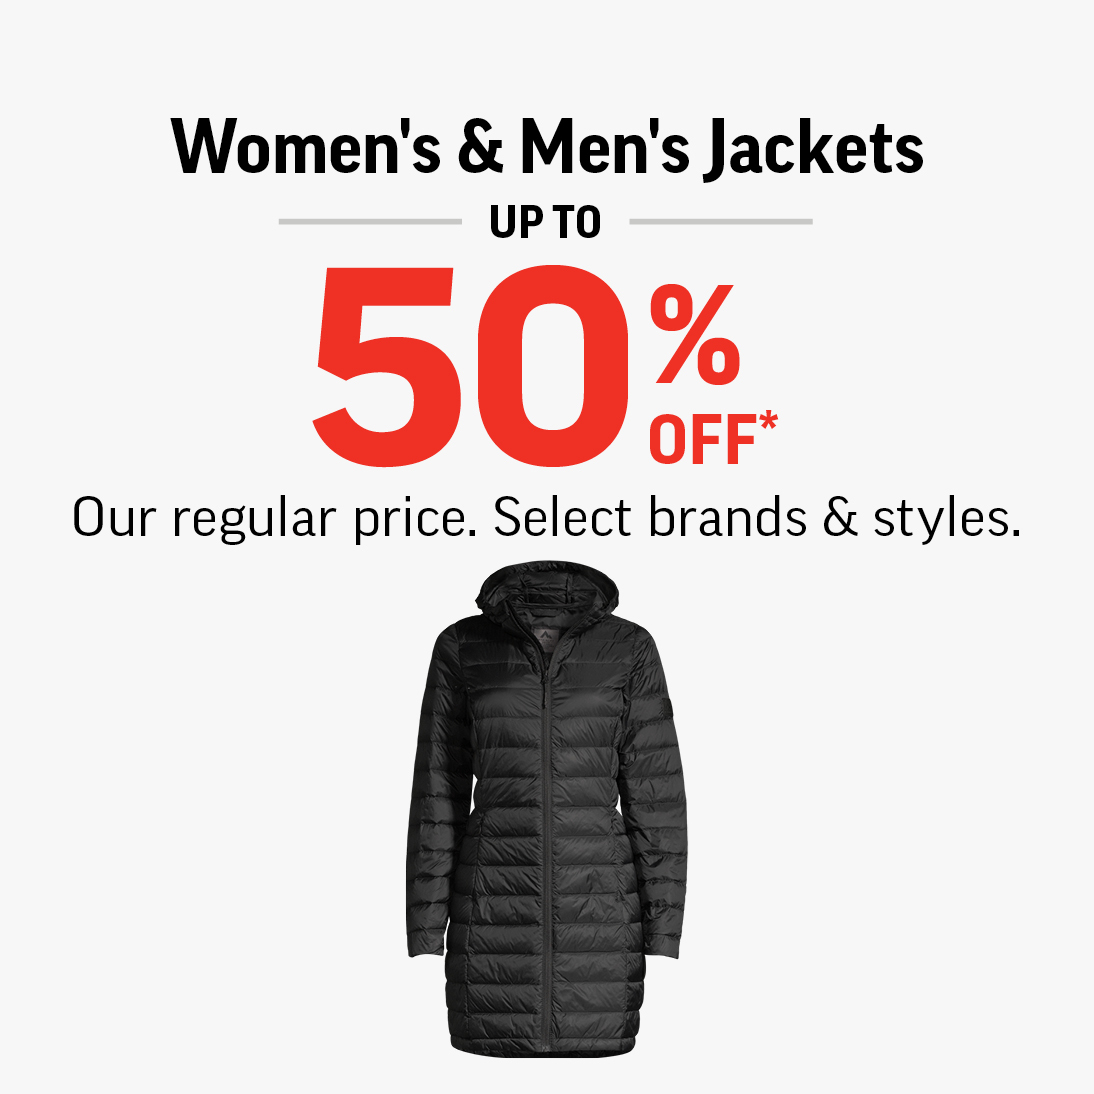 Offer title Jackets Up To 50% Off!